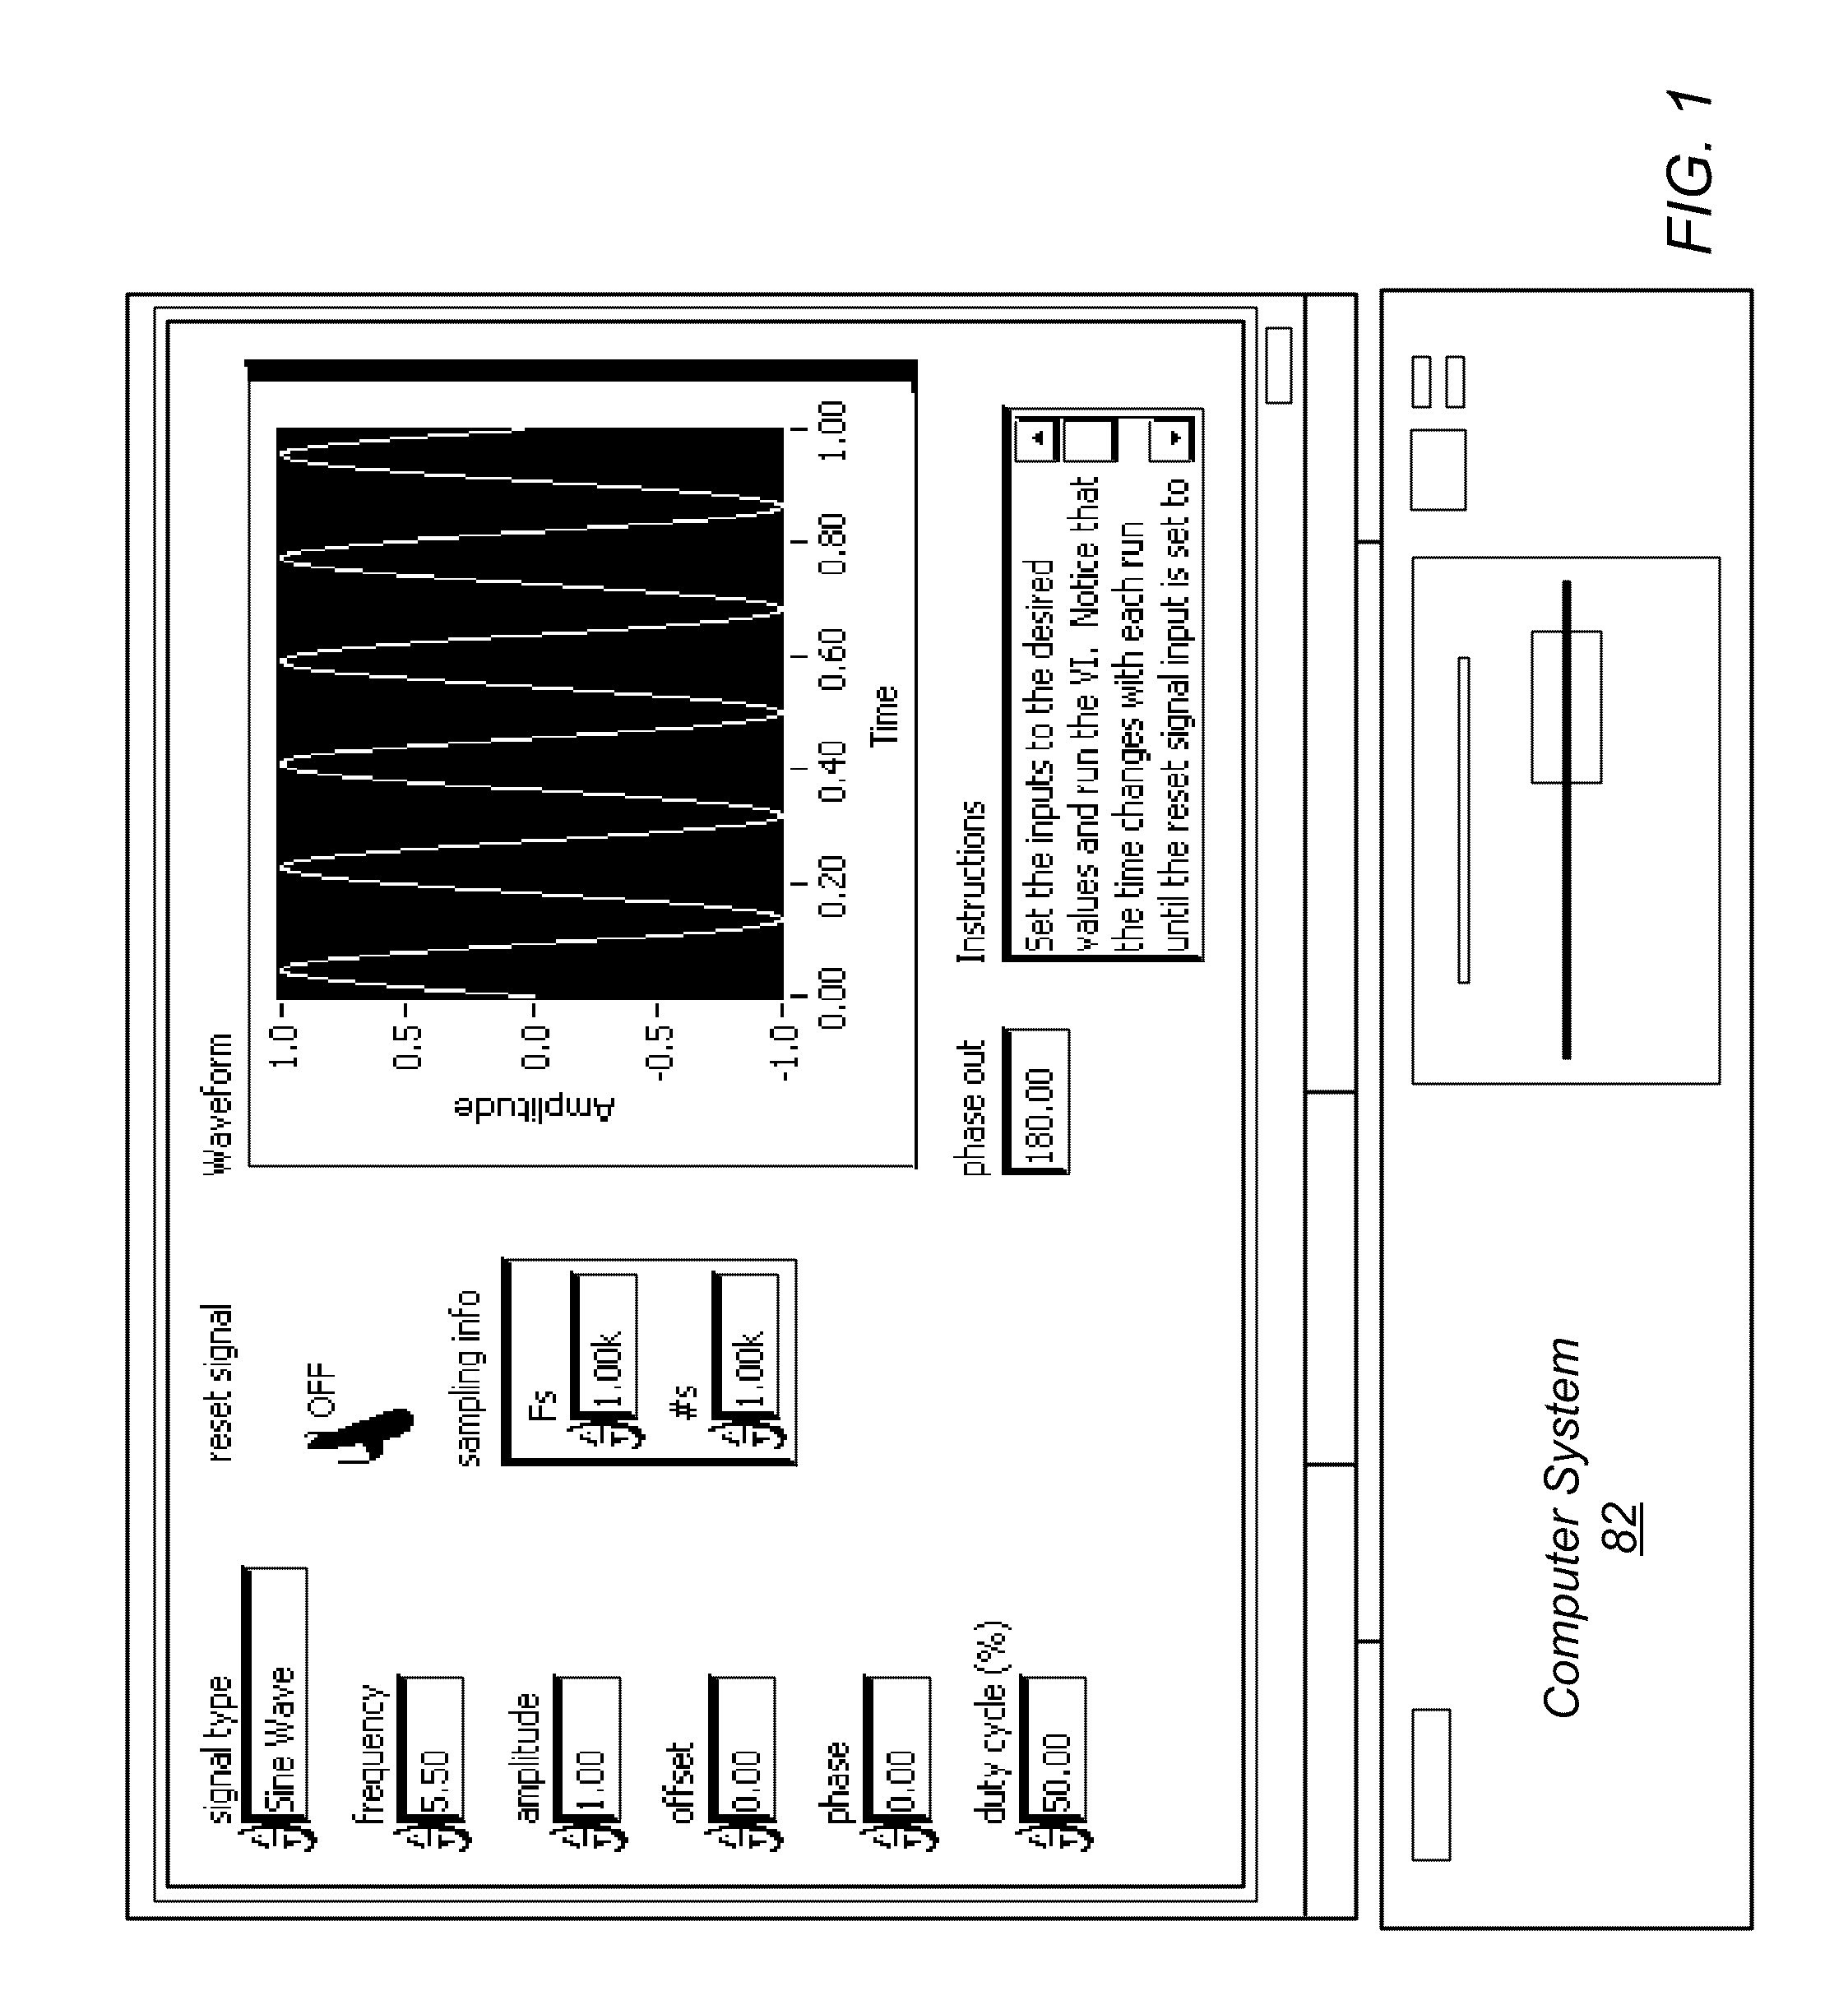 Graphical Programming System With Event-Handling Nodes